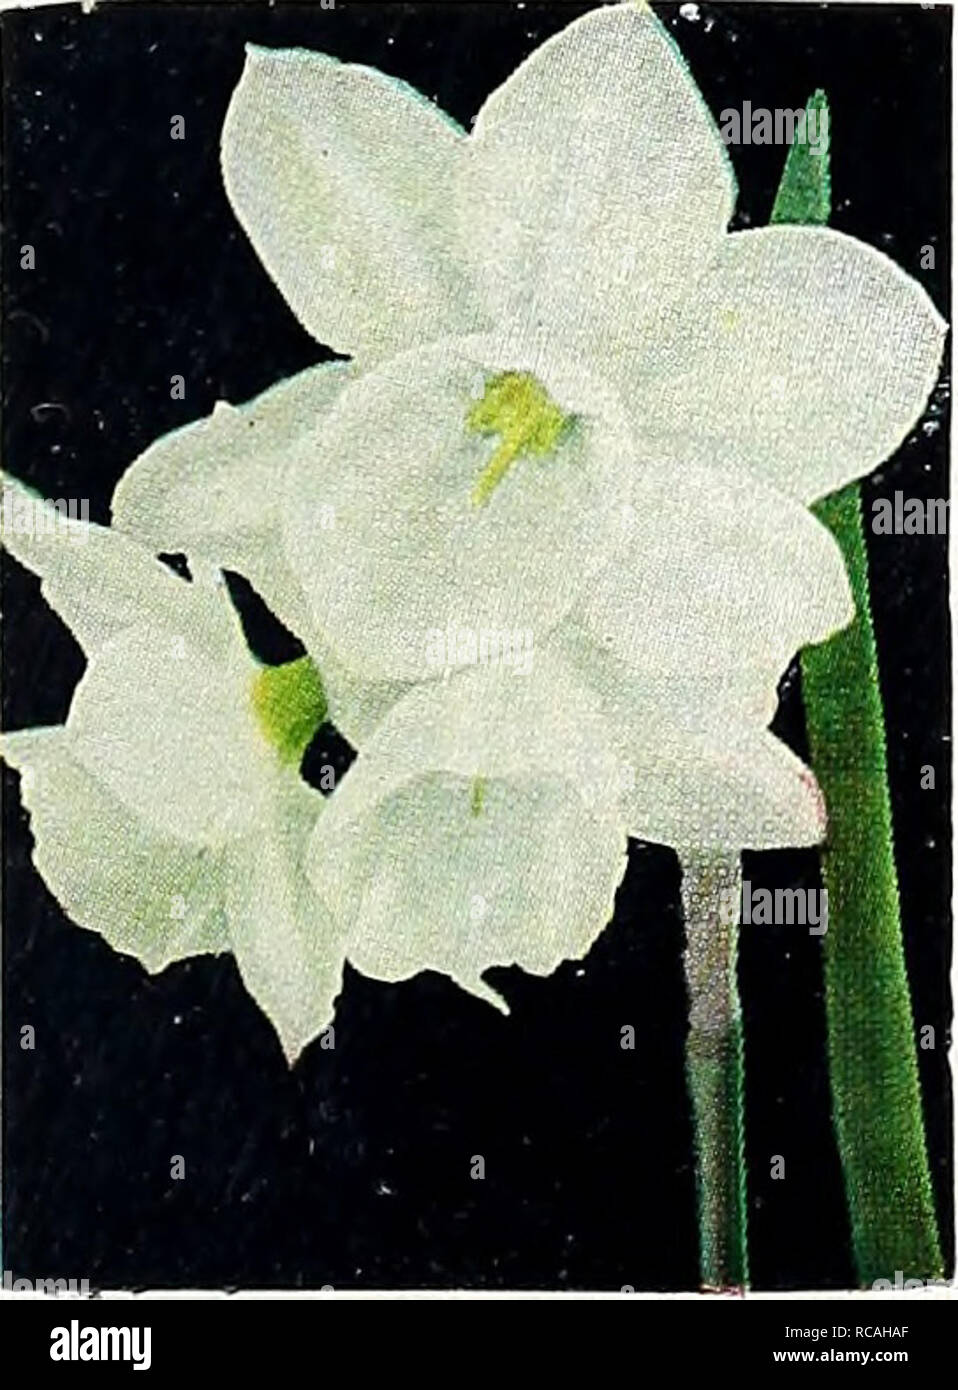 . Dreer's 1949 fall bulb catalog : 1838 - 111 years of quality - 1949. Bulbs (Plants) Catalogs; Flowers Seeds Catalogs; Gardening Equipment and supplies Catalogs; Nurseries (Horticulture) Catalogs; Vegetables Seeds Catalogs. W. P. MILNER. TRIANDRUS, Thaha ;z?&lt;.e2!i«^ NARCISSUS Could be called Bouquet Narcissus, for three or four flowers, like the Poet's Narcissus but smaller, are grouped together on each stem. They are hardy, force easily, and are delightfully sweet scented. Cheerfulness, 40-780. Double; white. 20c each; $1.50 per doz.; $10.00 per 100. Geranium, 40-787. Single, pure white p Stock Photo